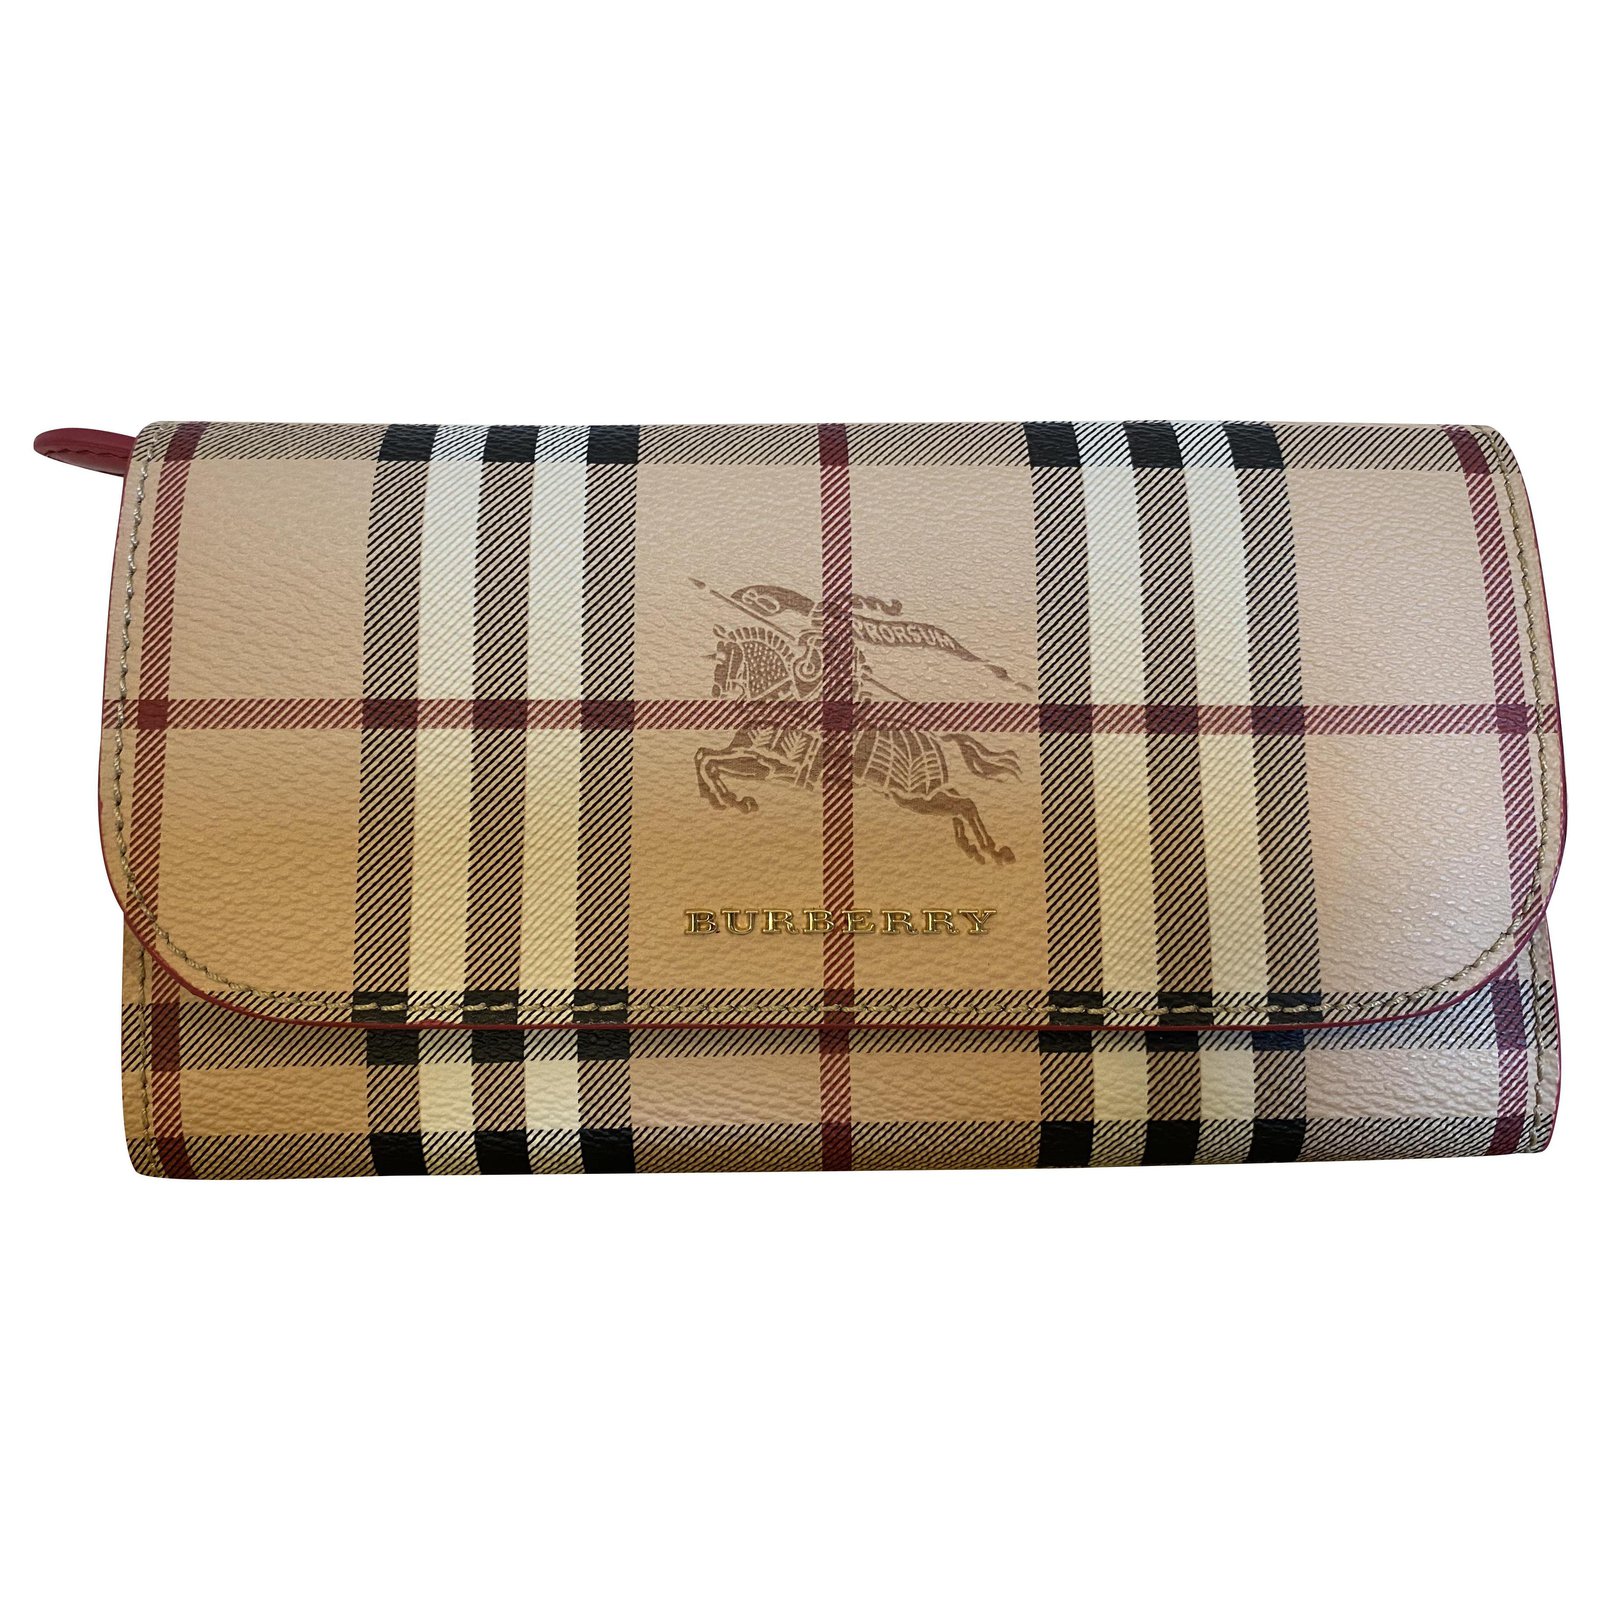 Burberry Haymarket Check and Leather Slim Continental Wallet Pink ref ...